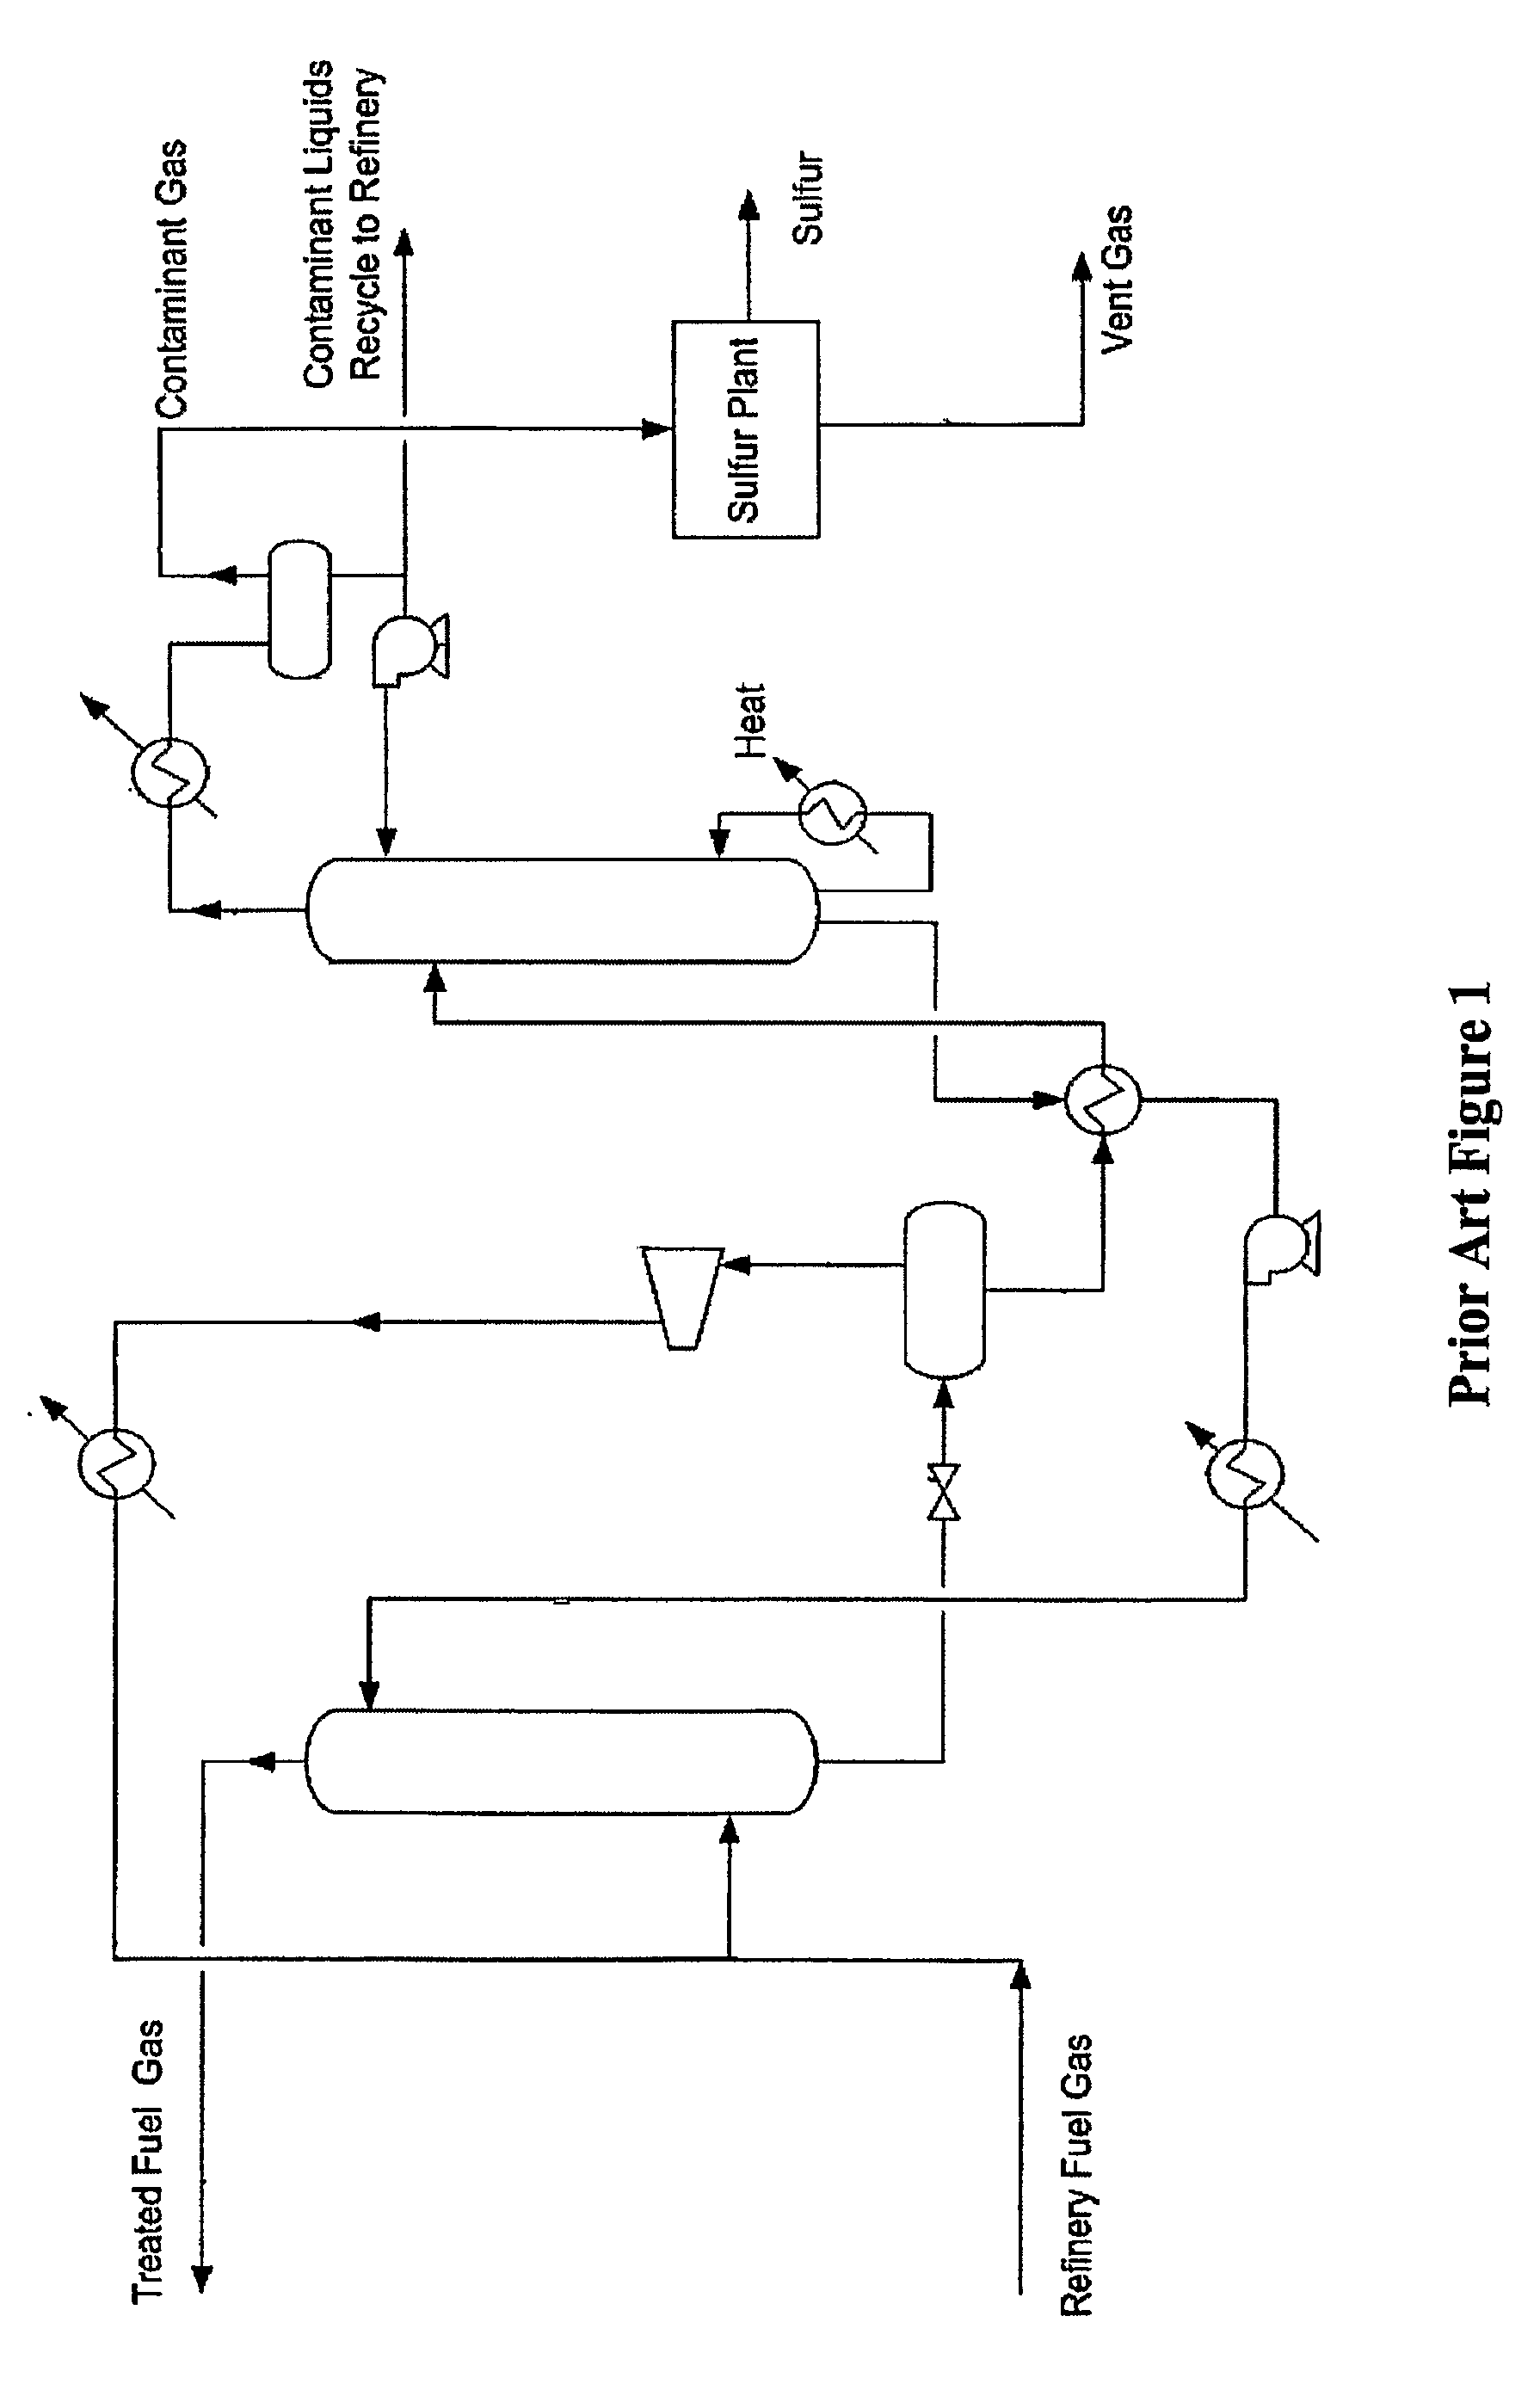 Configurations and methods for removal of mercaptans from feed gases